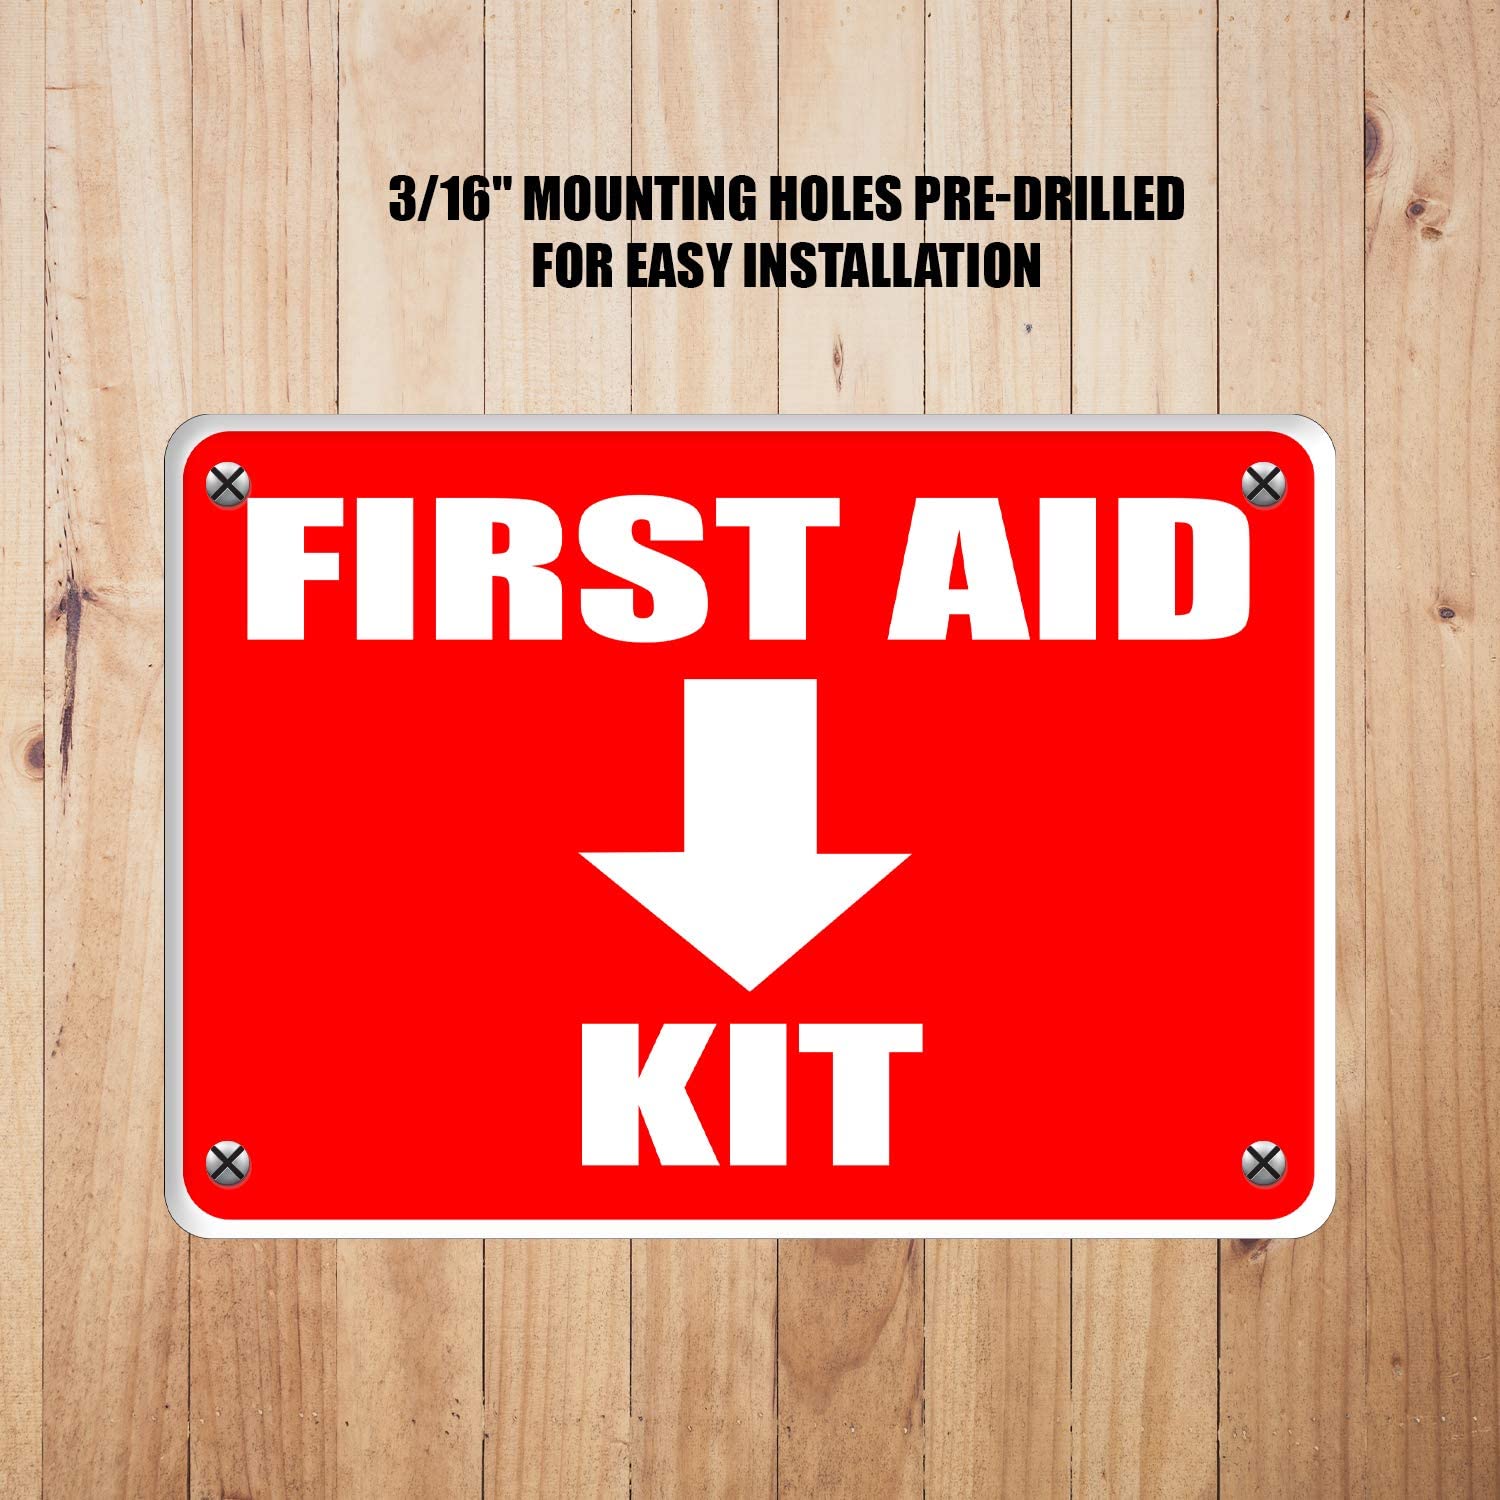 First Aid Kit Sign, Durable Plastic Safety Sign, 7 x 10 Inch, Red on White, for Indoor/Outdoor Use